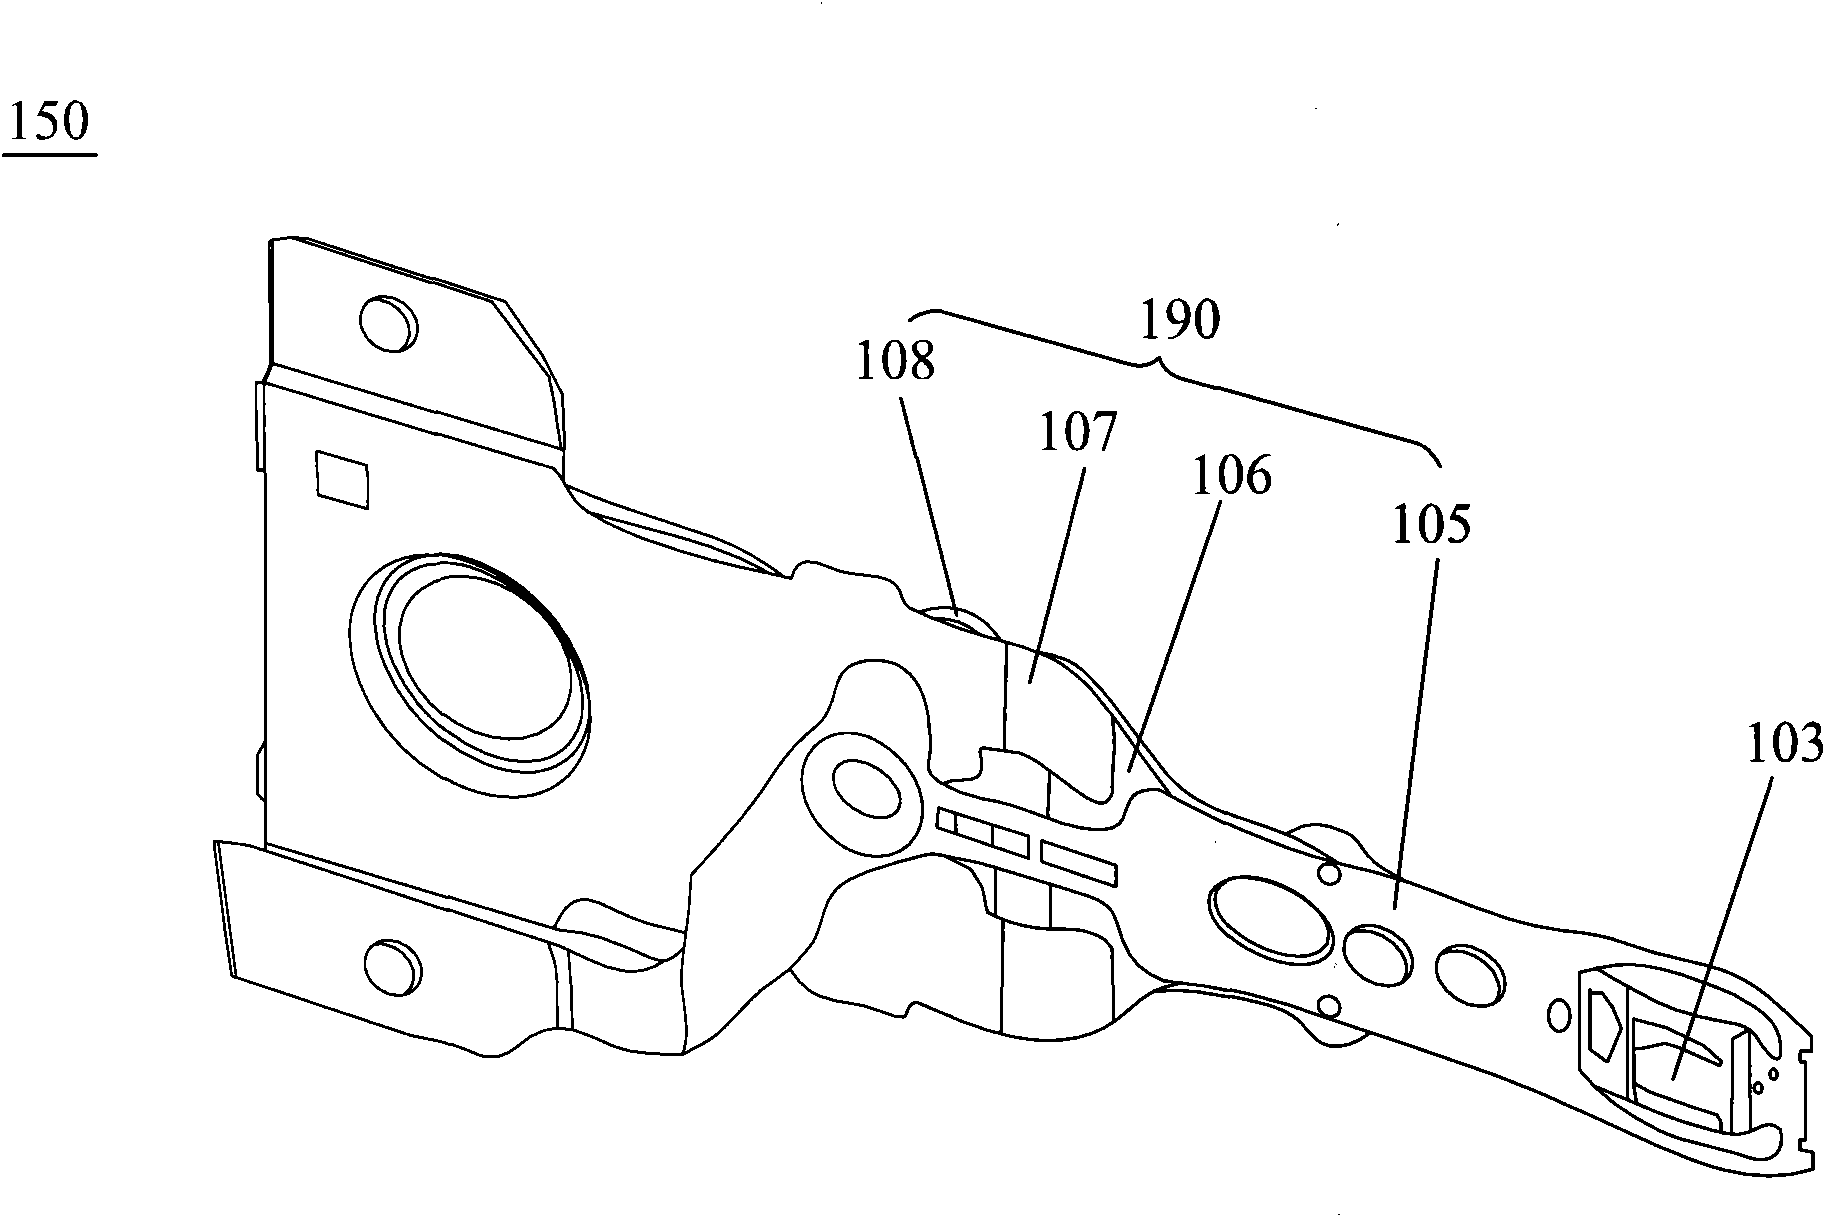 Cantilever part, head gimbal assembly and disc driving unit